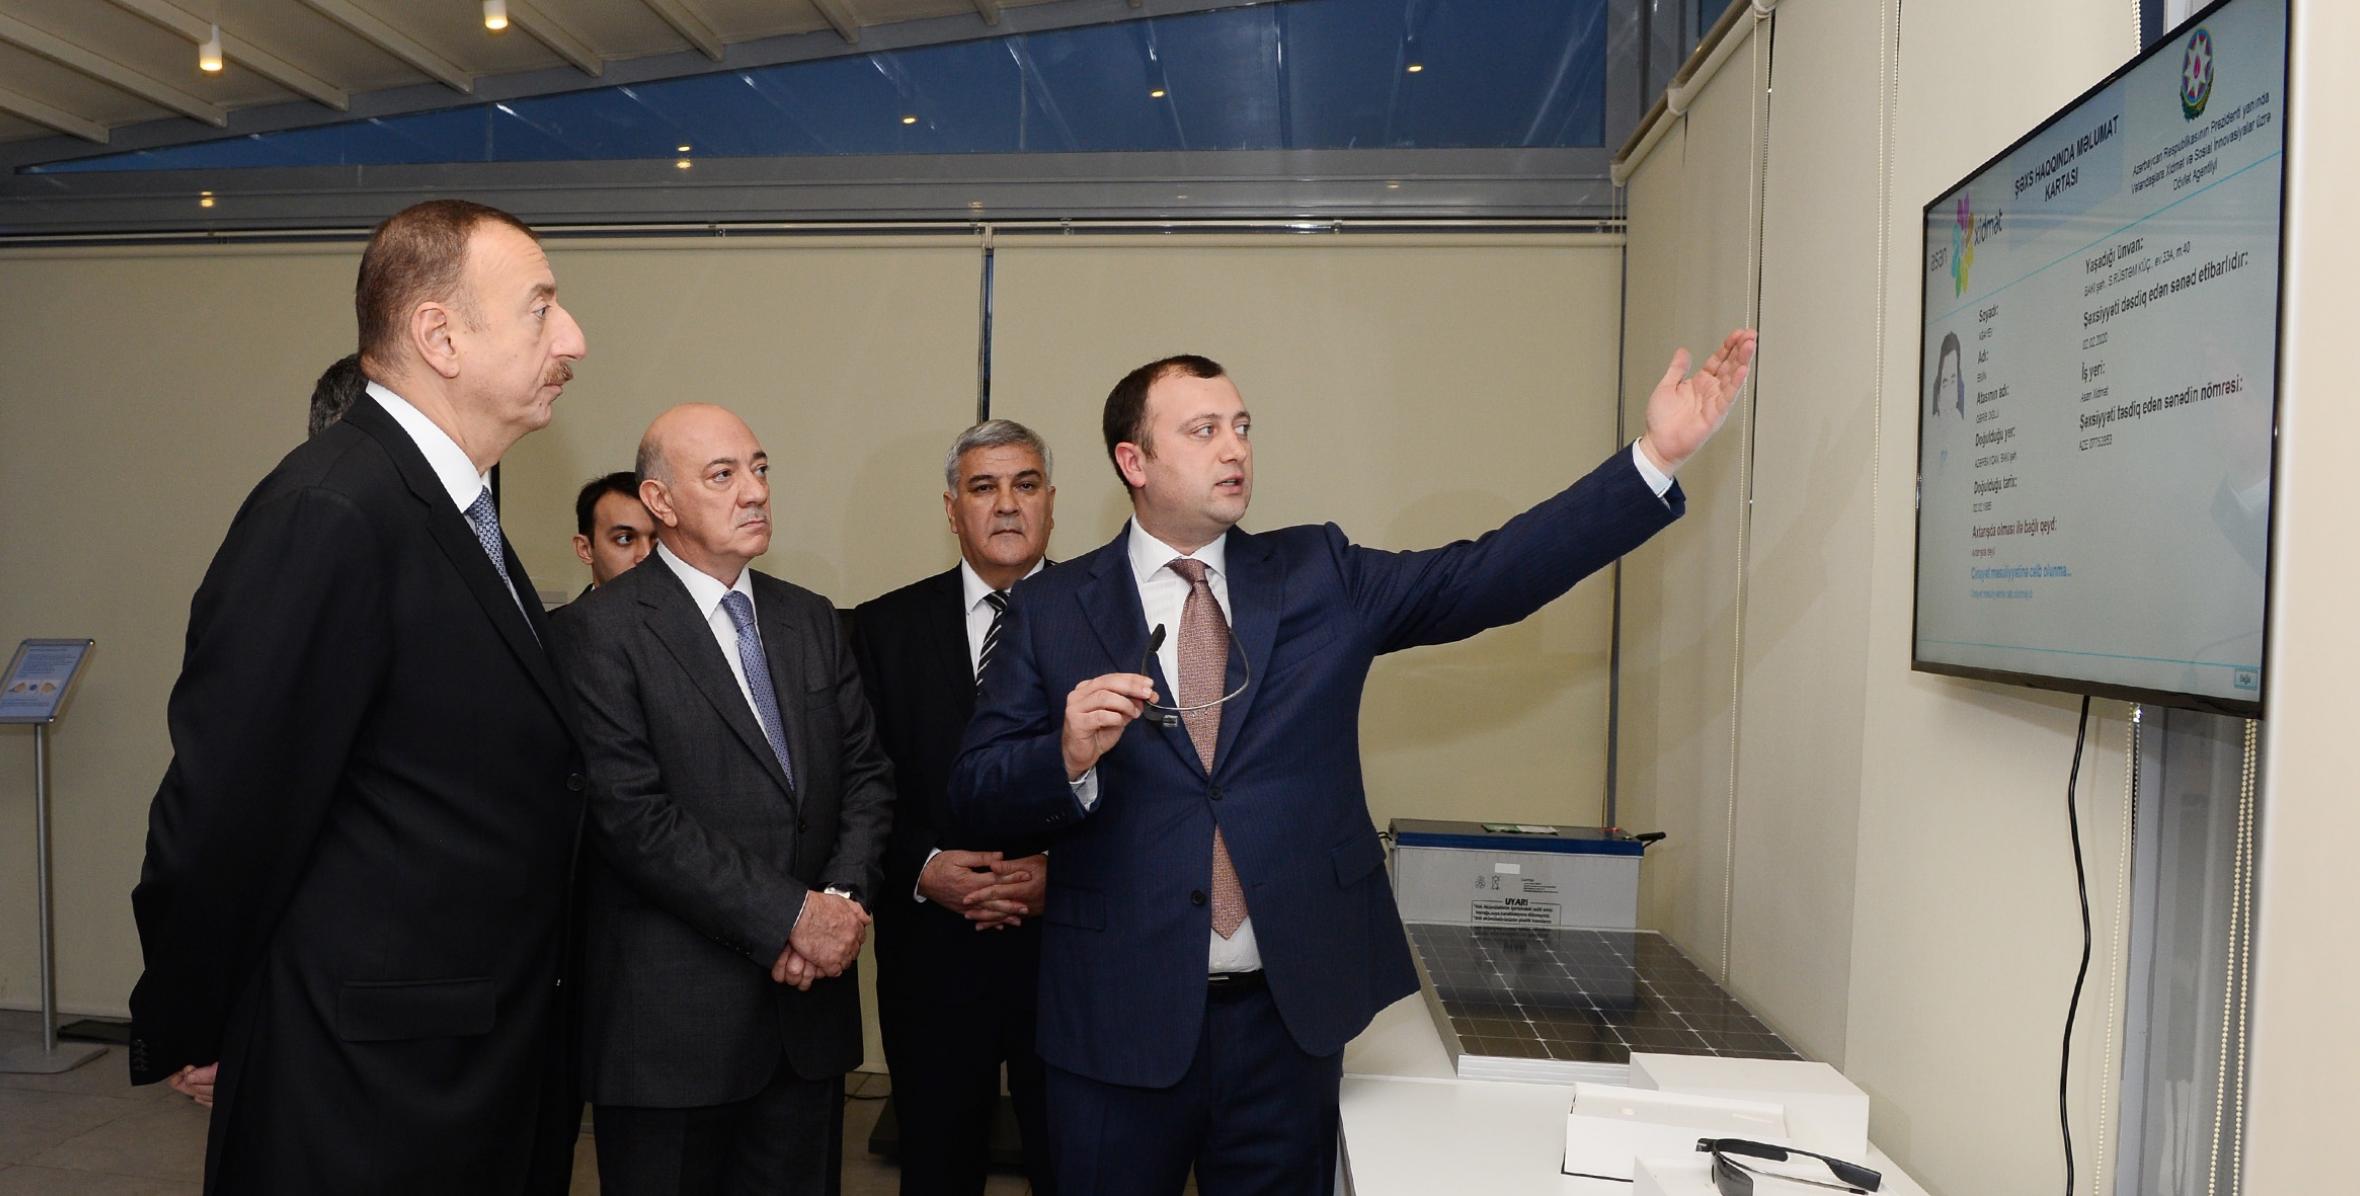 Ilham Aliyev attended the opening of “ASAN xidmət” center of Sabirabad branch of the State Agency for Public Service and Social Innovations